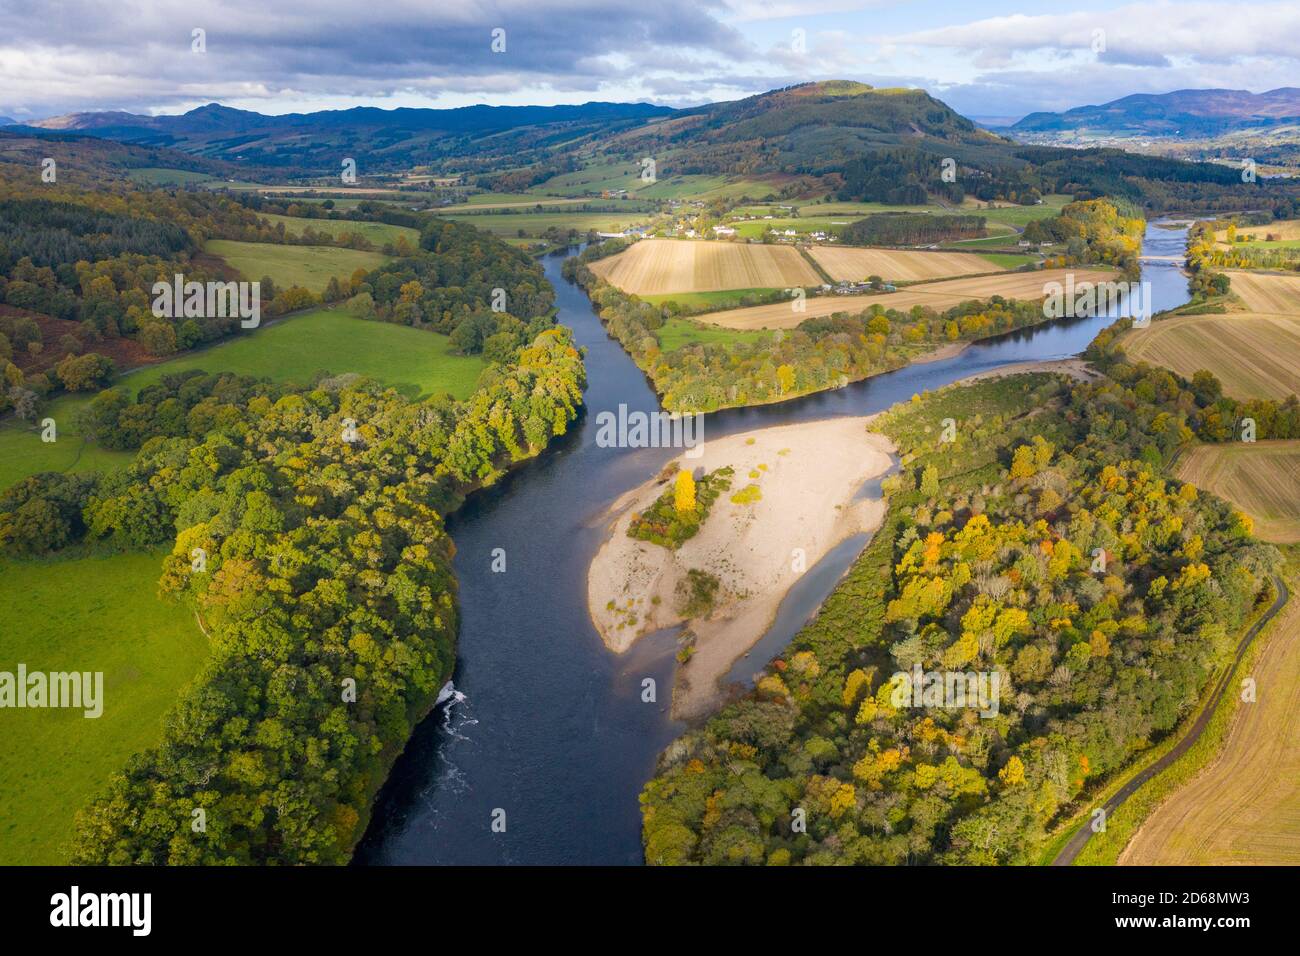 Autumn view of confluence of River Tay and River Tummel (r) at Ballinluig. These are two of Scotland's foremost salmon rivers. Stock Photo